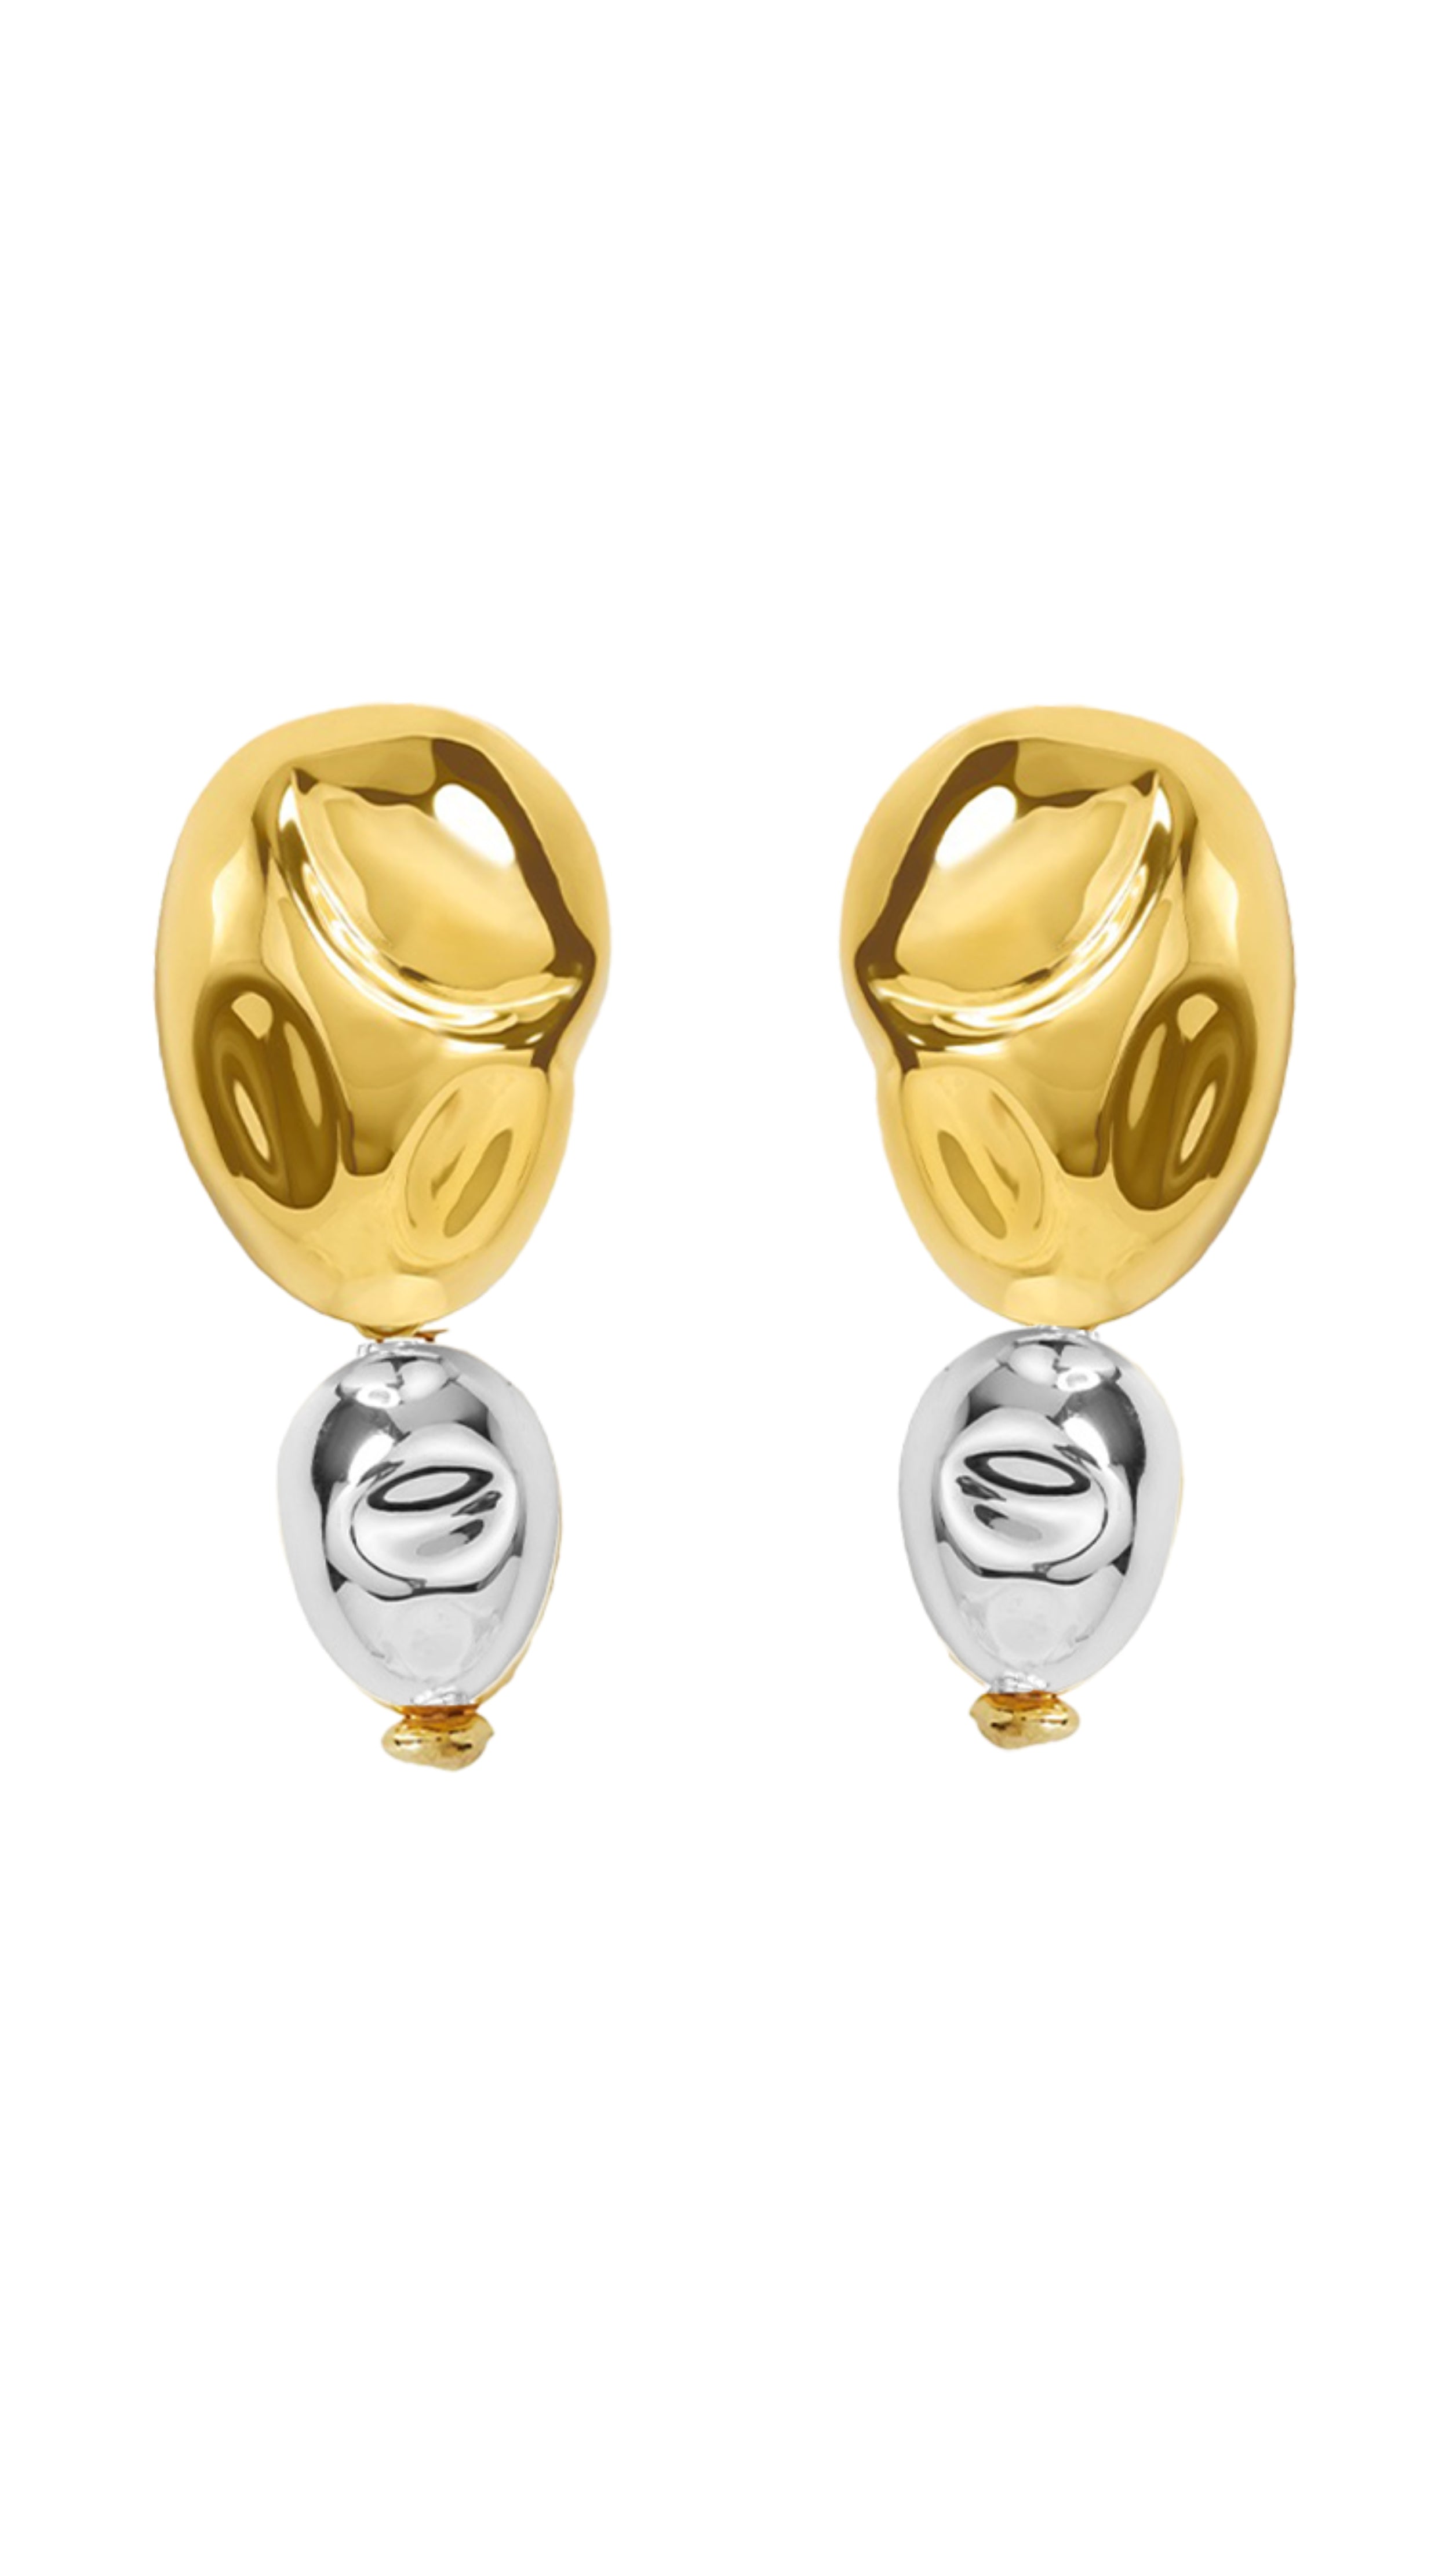 Monica Sordo Oriente earrings in gold and silver. Organically shaped drop earrings in 24 carat plated gold and silver. Sustainable jewelry, fair trade. Photo shows the pair of earrings from the front.